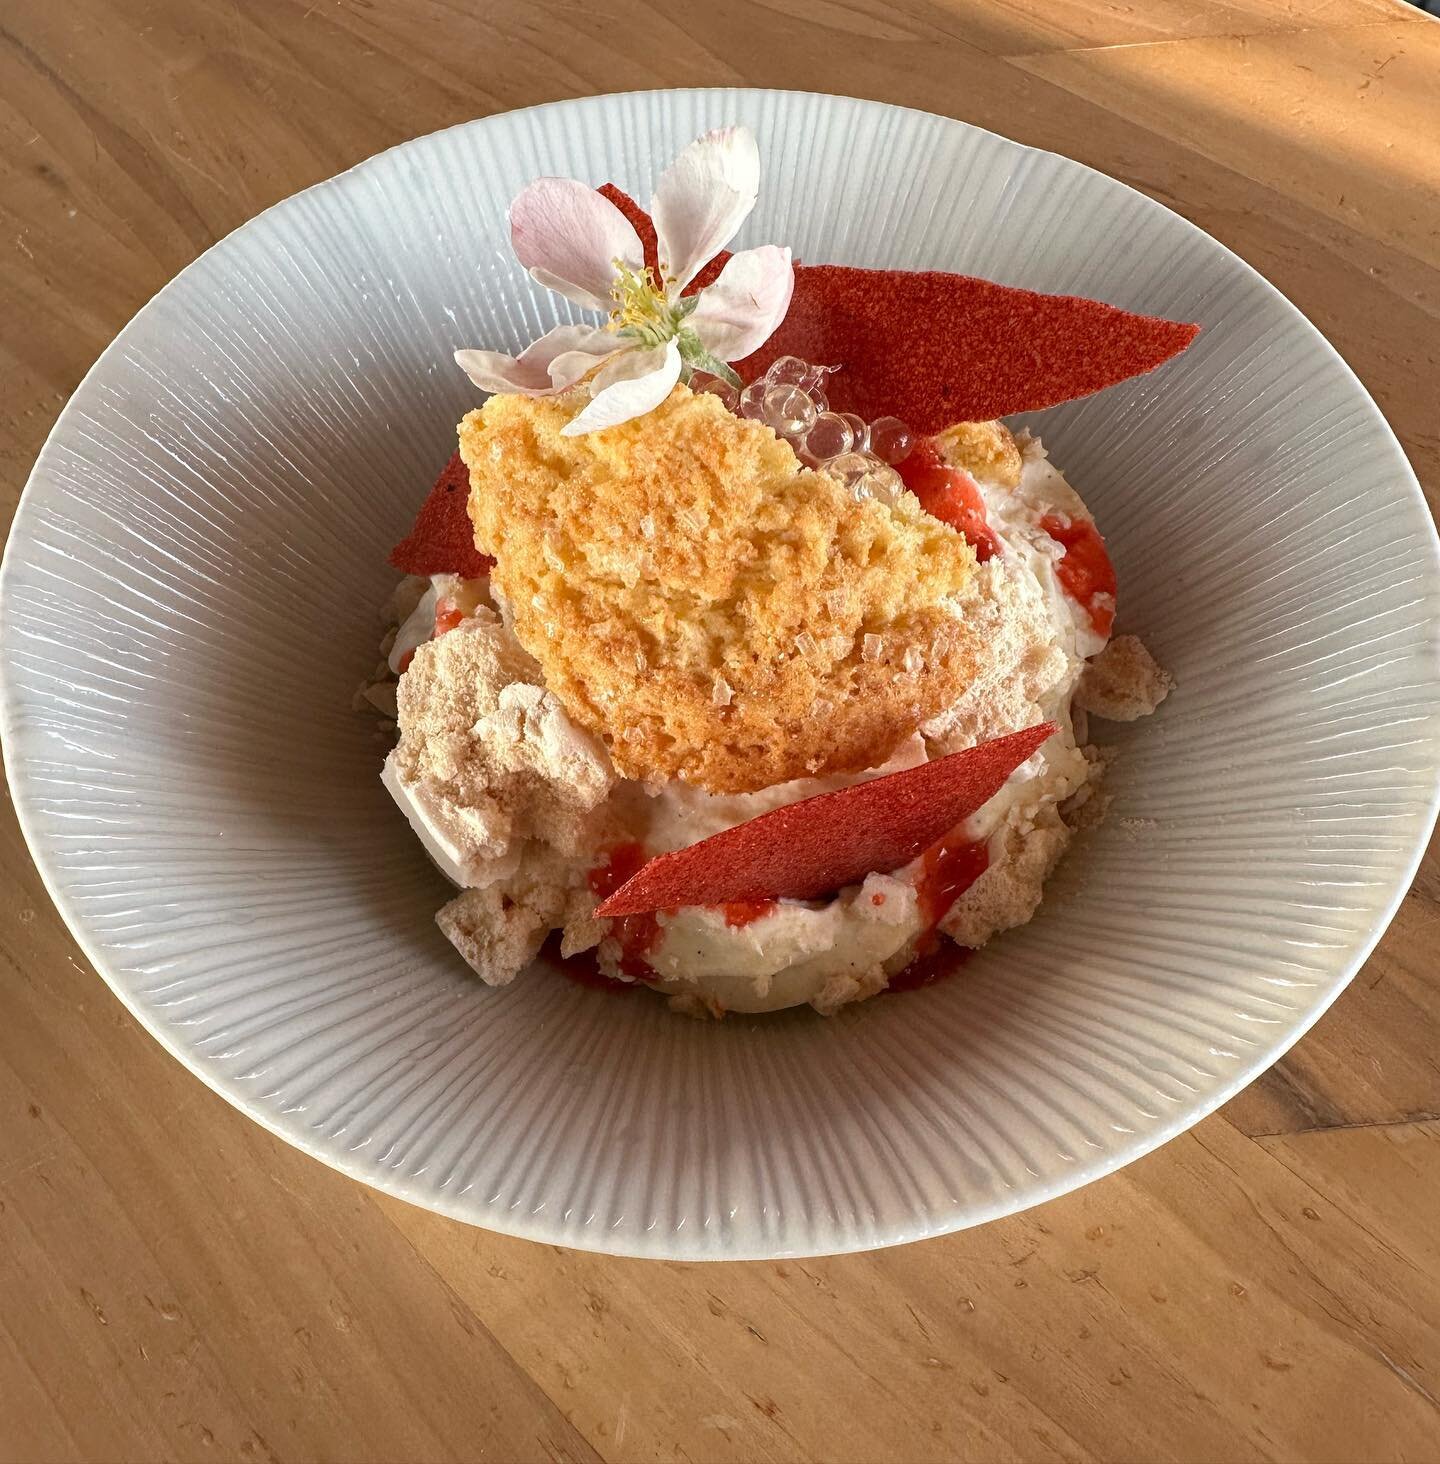 Made with fresh strawberries and cream, our Strawberry Shortcake is sure to satisfy